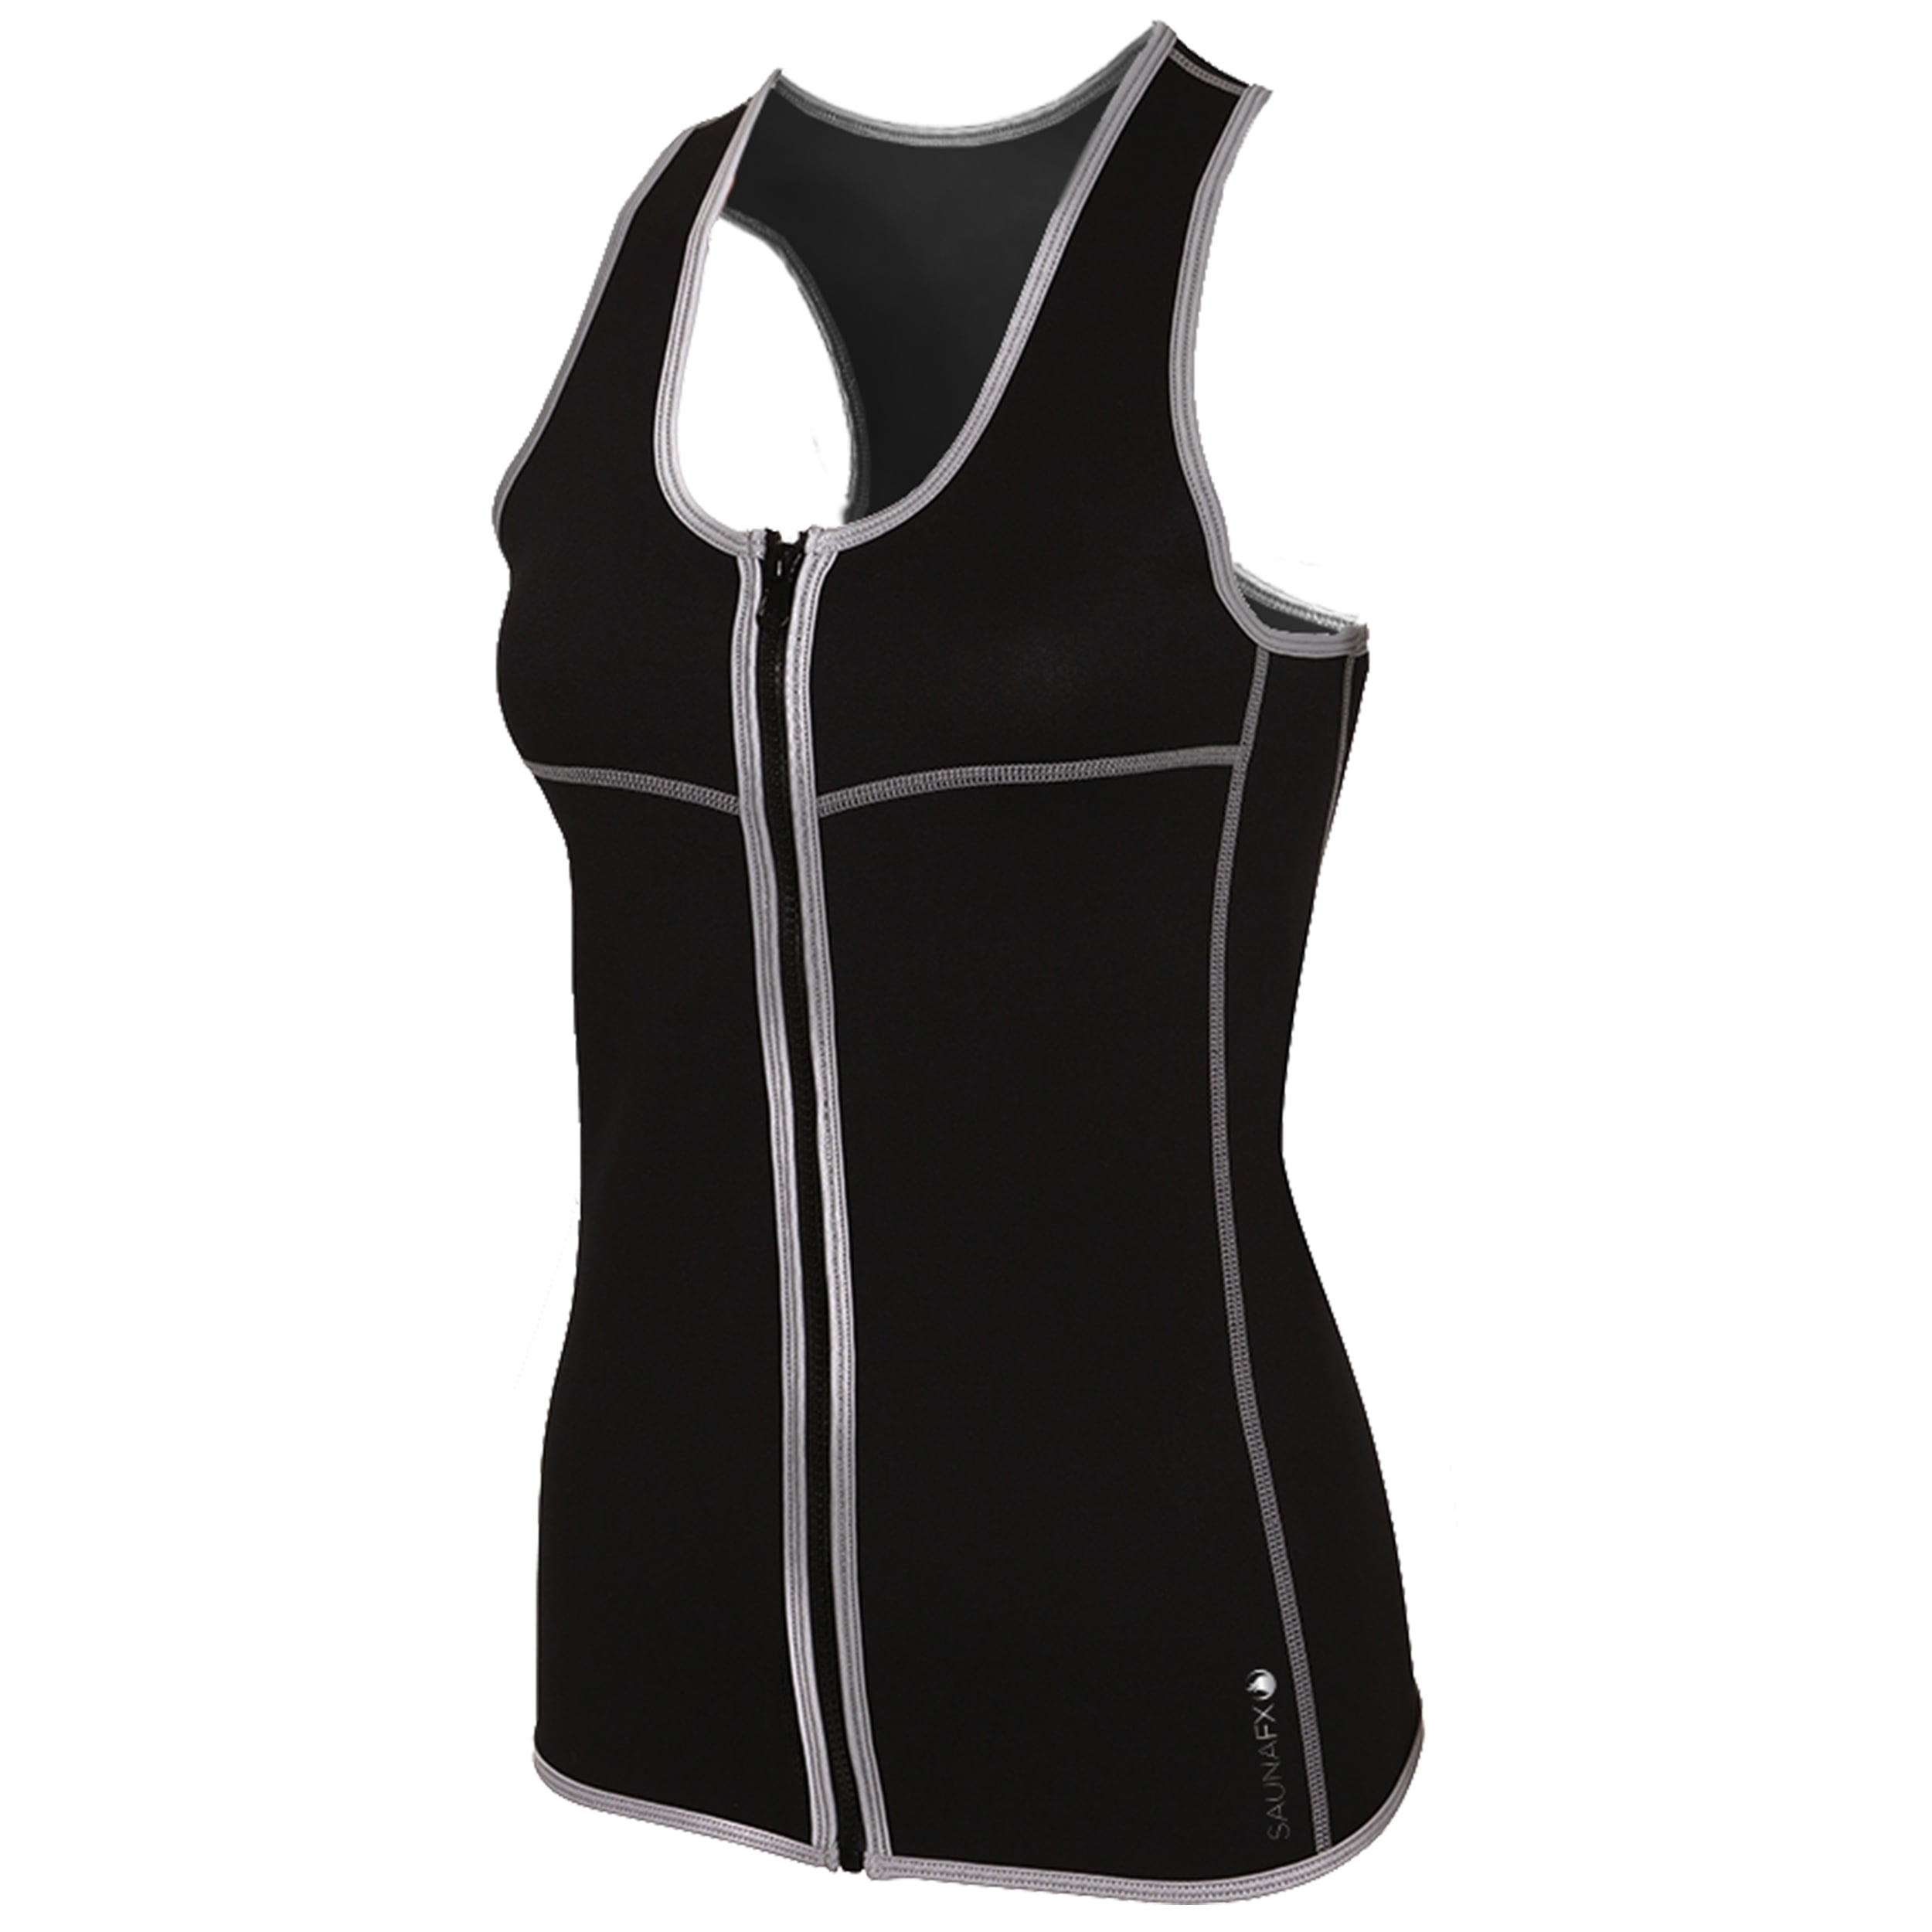 SaunaFX Women's Slimming Neoprene Sauna Vest XXL with Microban Antimicrobial Product Protection